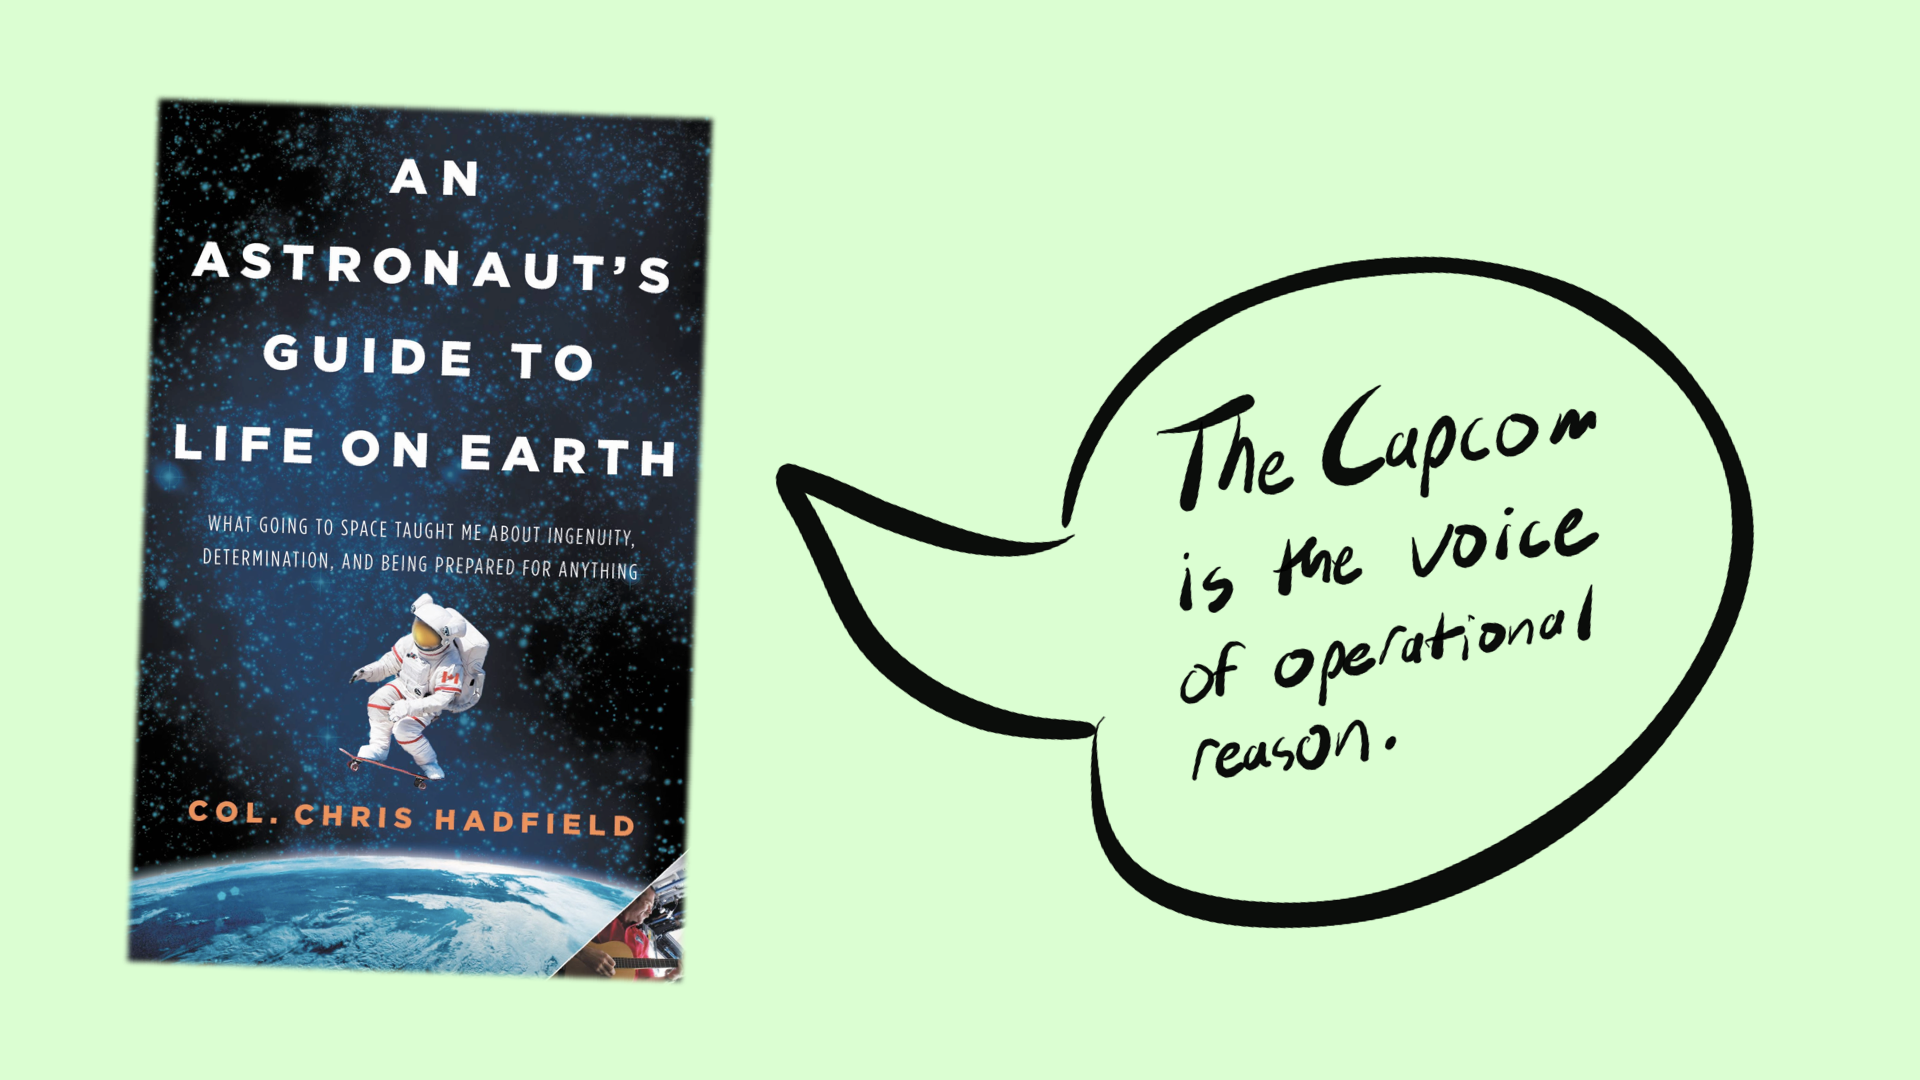 Image of book with quote "The Capcom is the voice of operational reason."